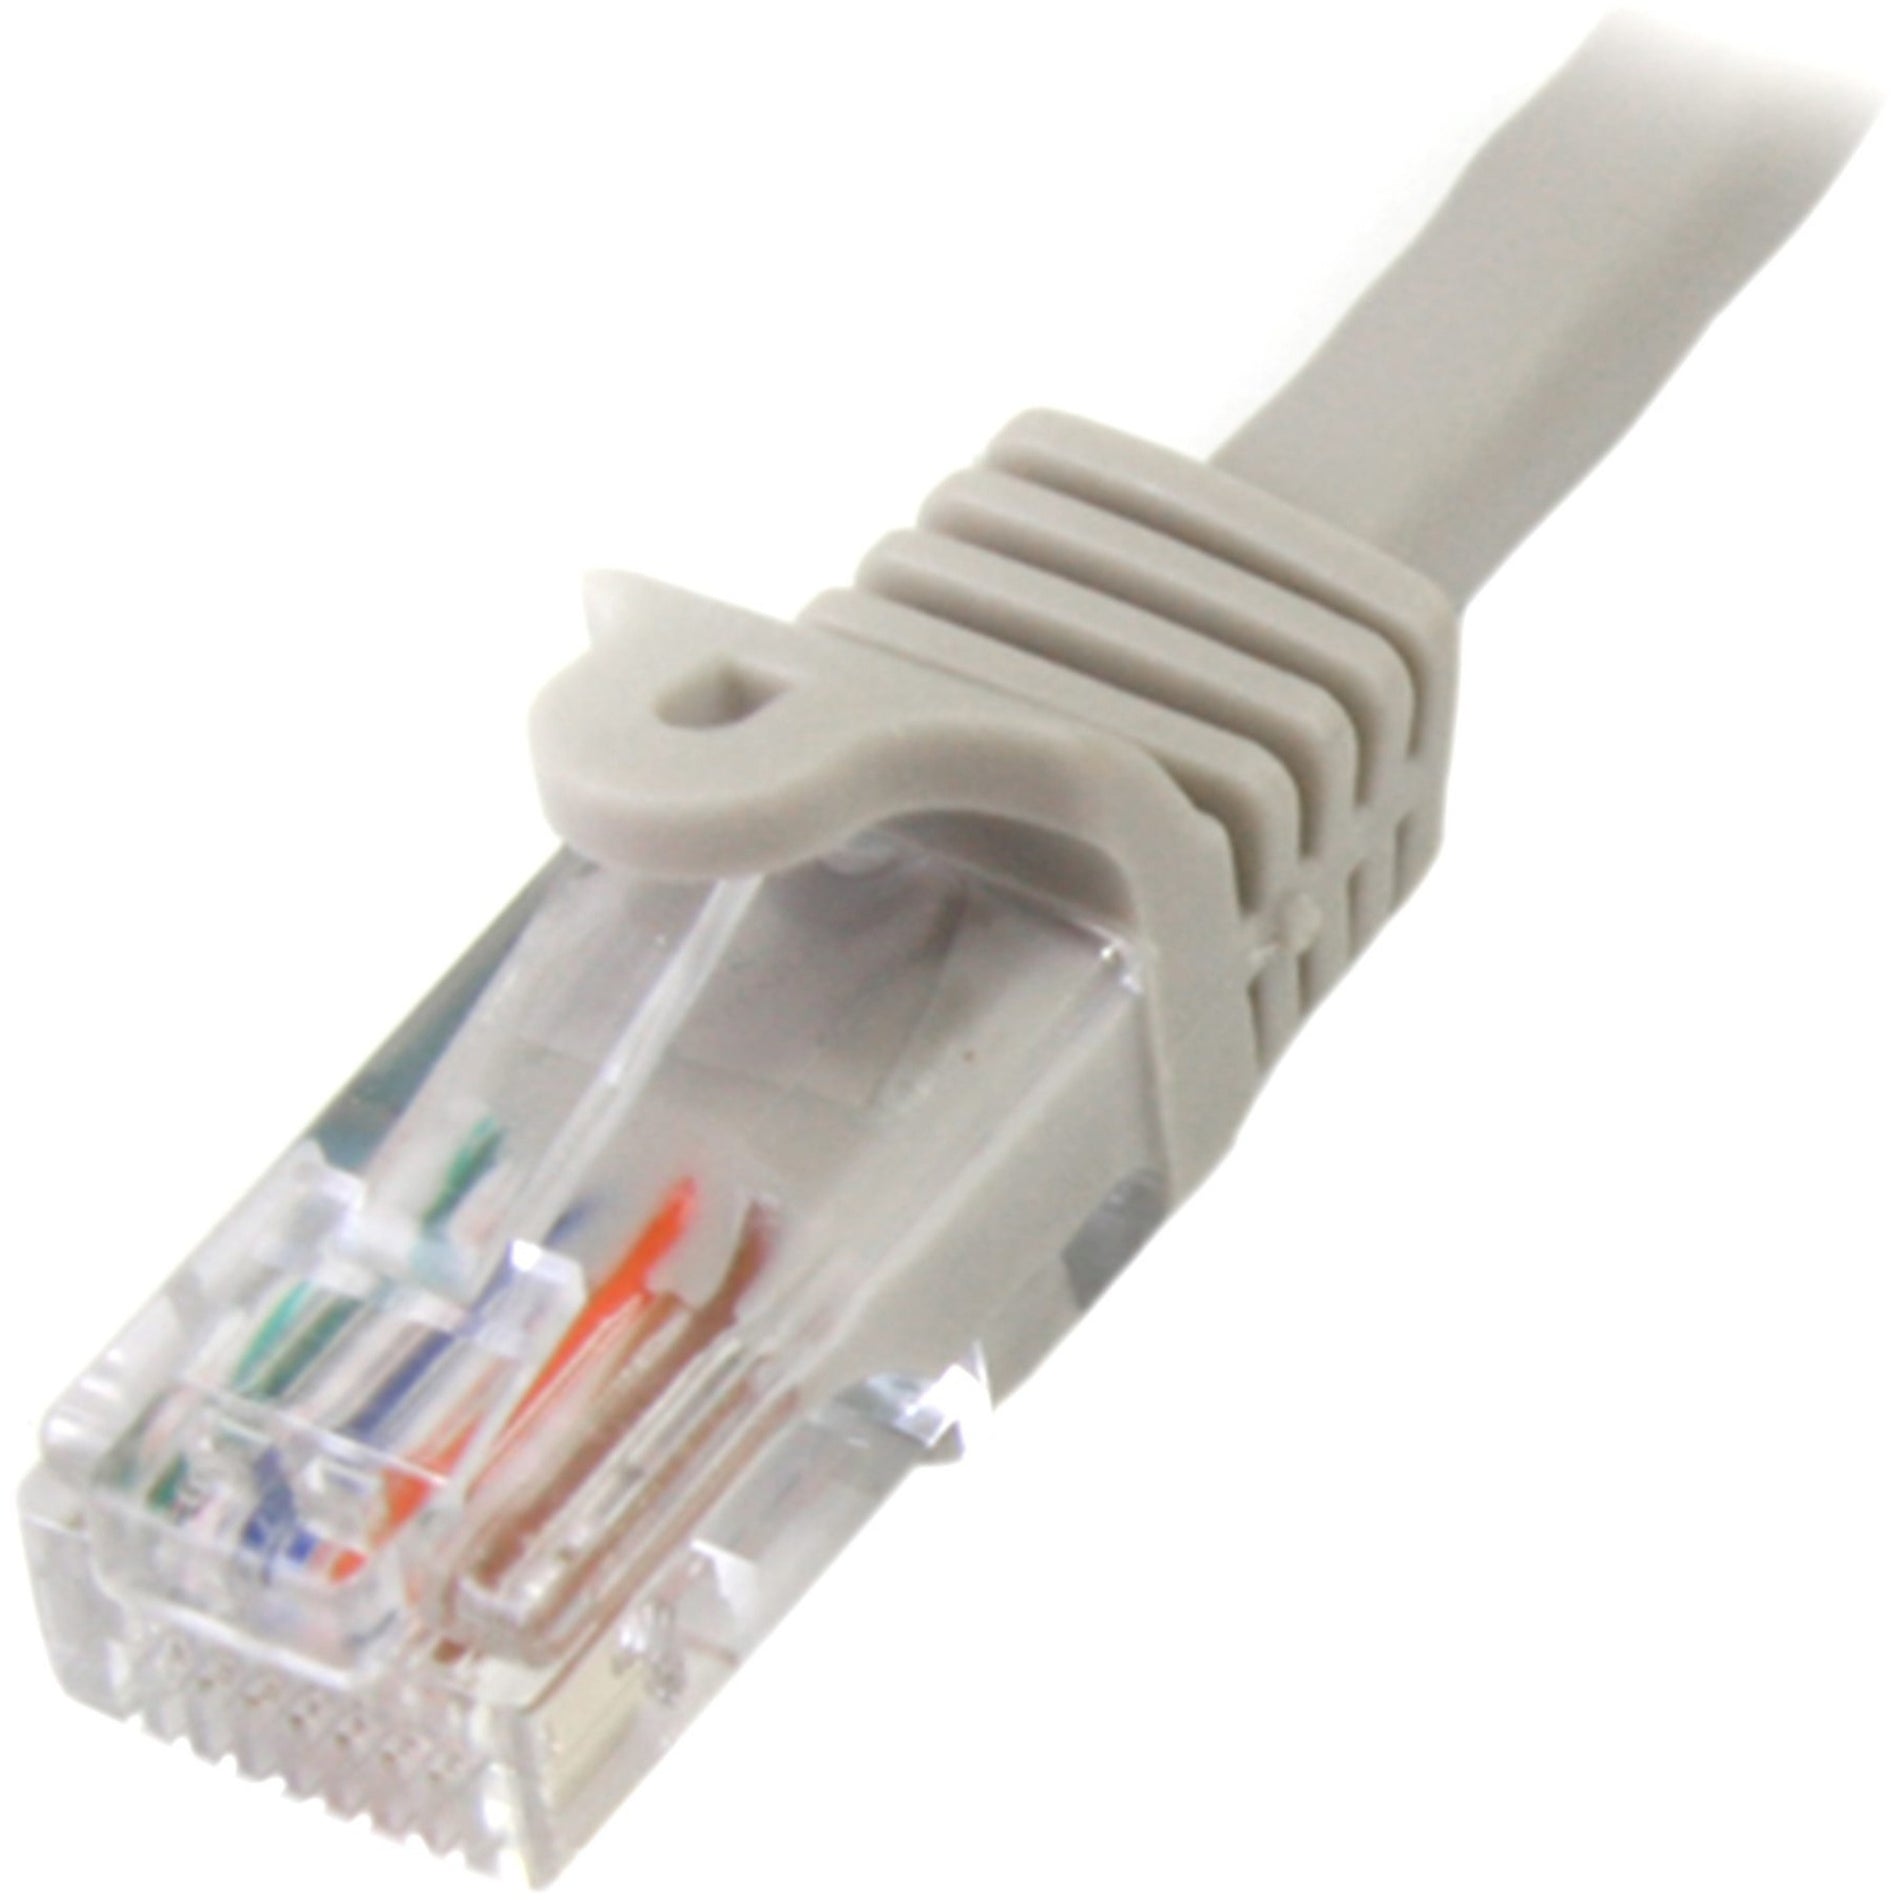 StarTech.com 45PATCH15GR 15ft Gray Snagless Cat5e UTP Patch Cable Lifetime Warranty Gold Connectors  スタートテック・ドットコム 45PATCH15GR 15フィート グレー スナッグレス Cat5e UTP パッチケーブル、ライフタイム保証、ゴールドコネクタ